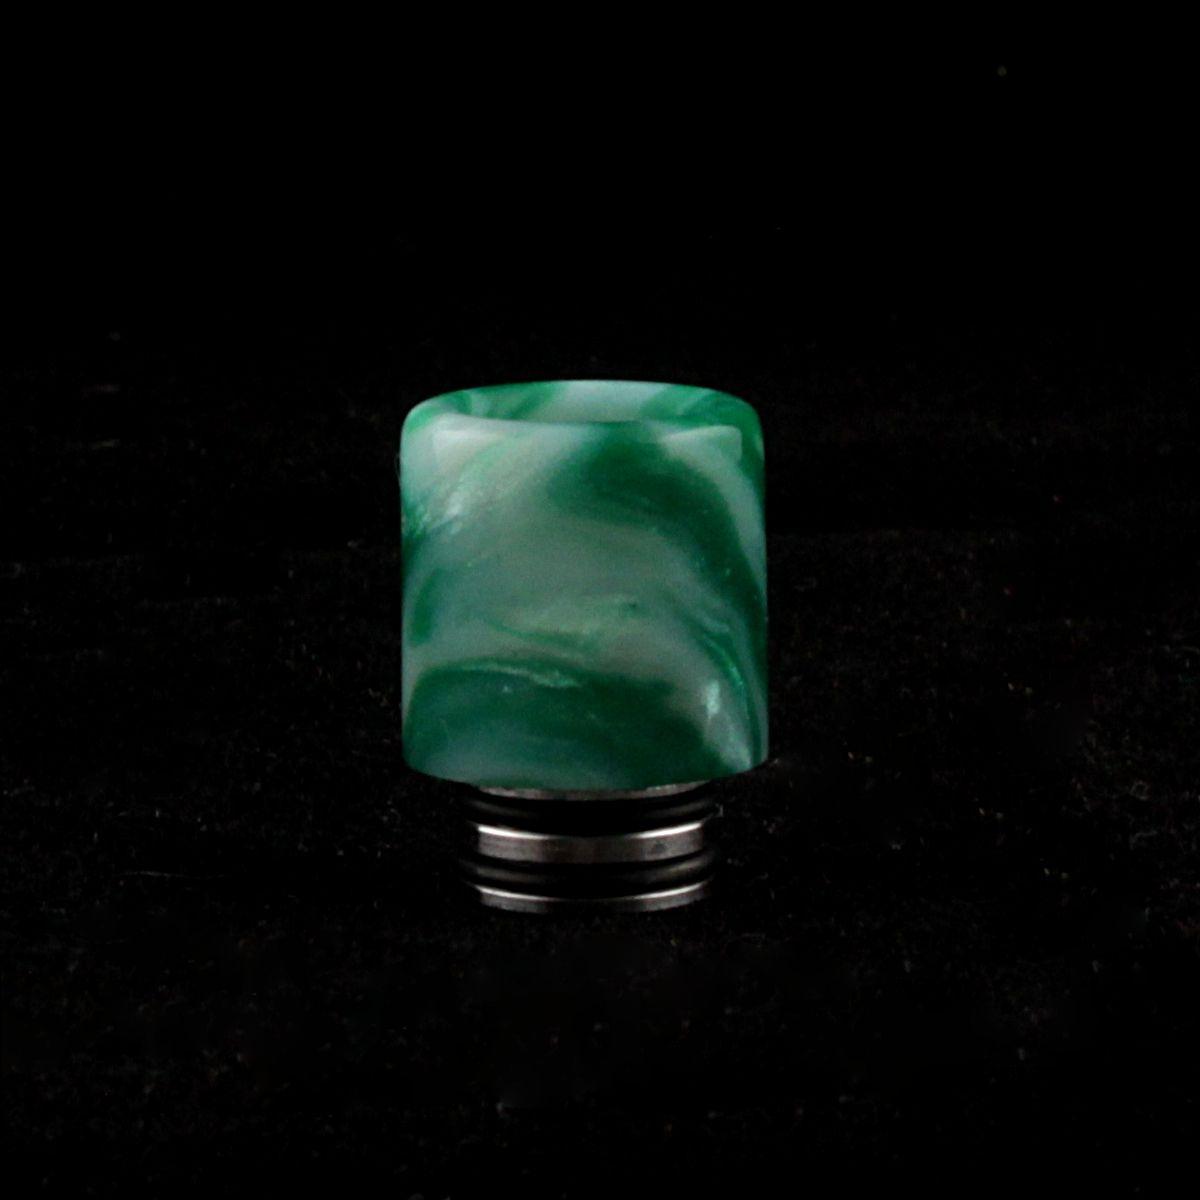 Green and White Swirl Logo - Green and White swirl hand crafted acrylic 510 wide bore drip tip